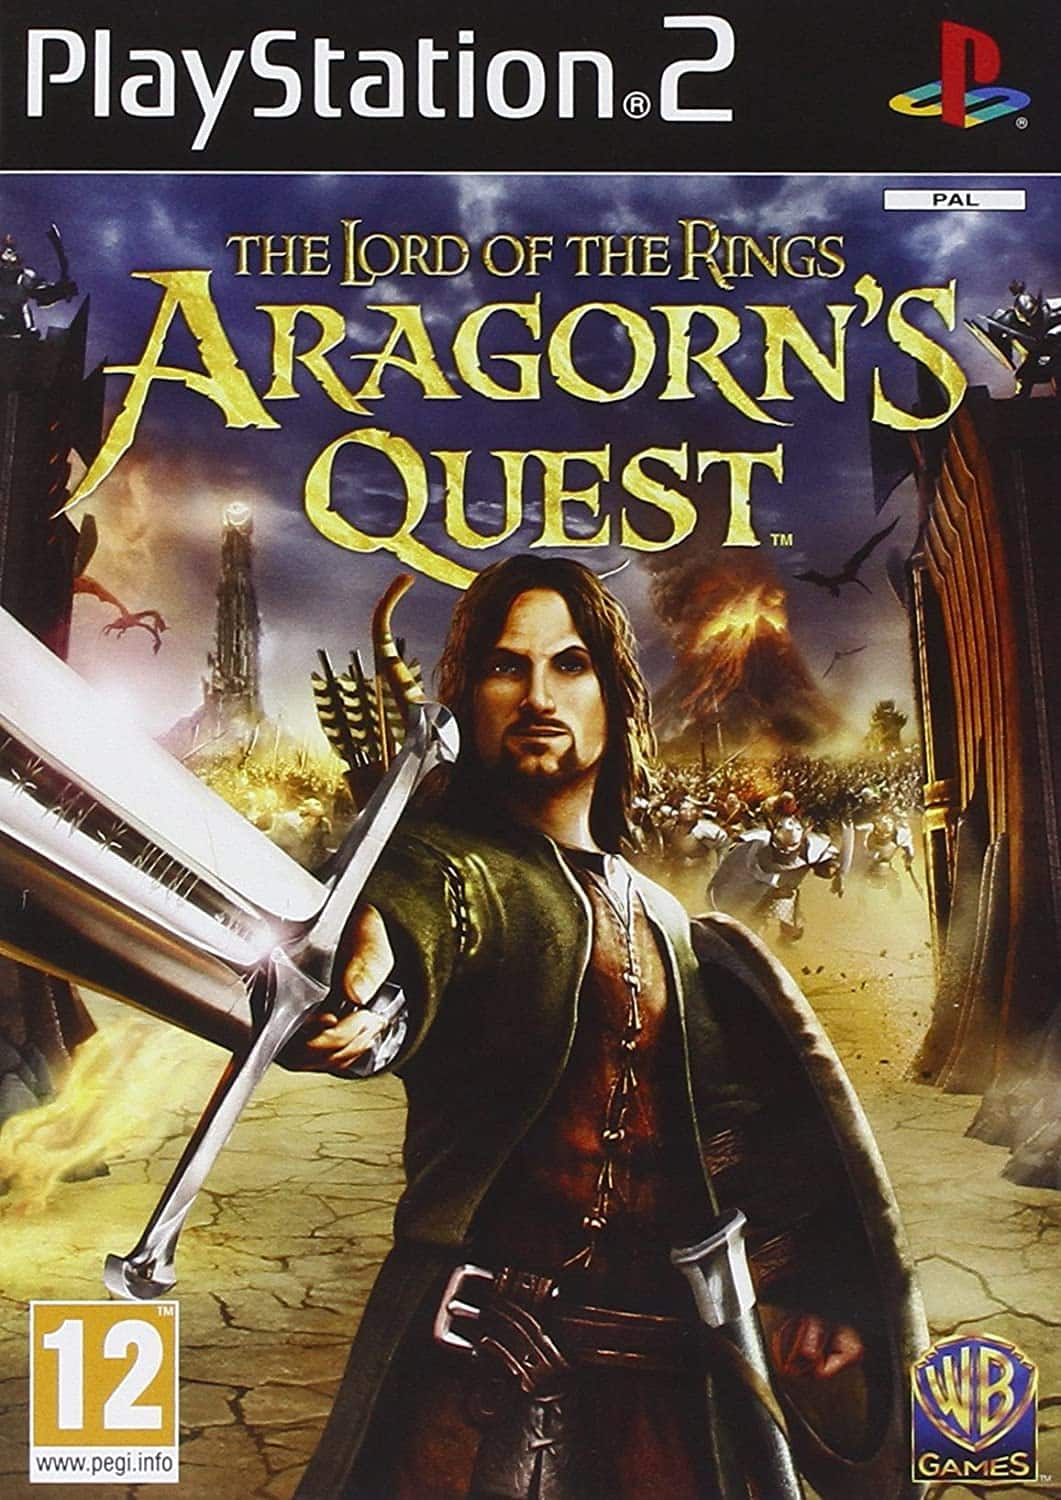 The Lord of the Rings: Aragorn’s Quest player count stats